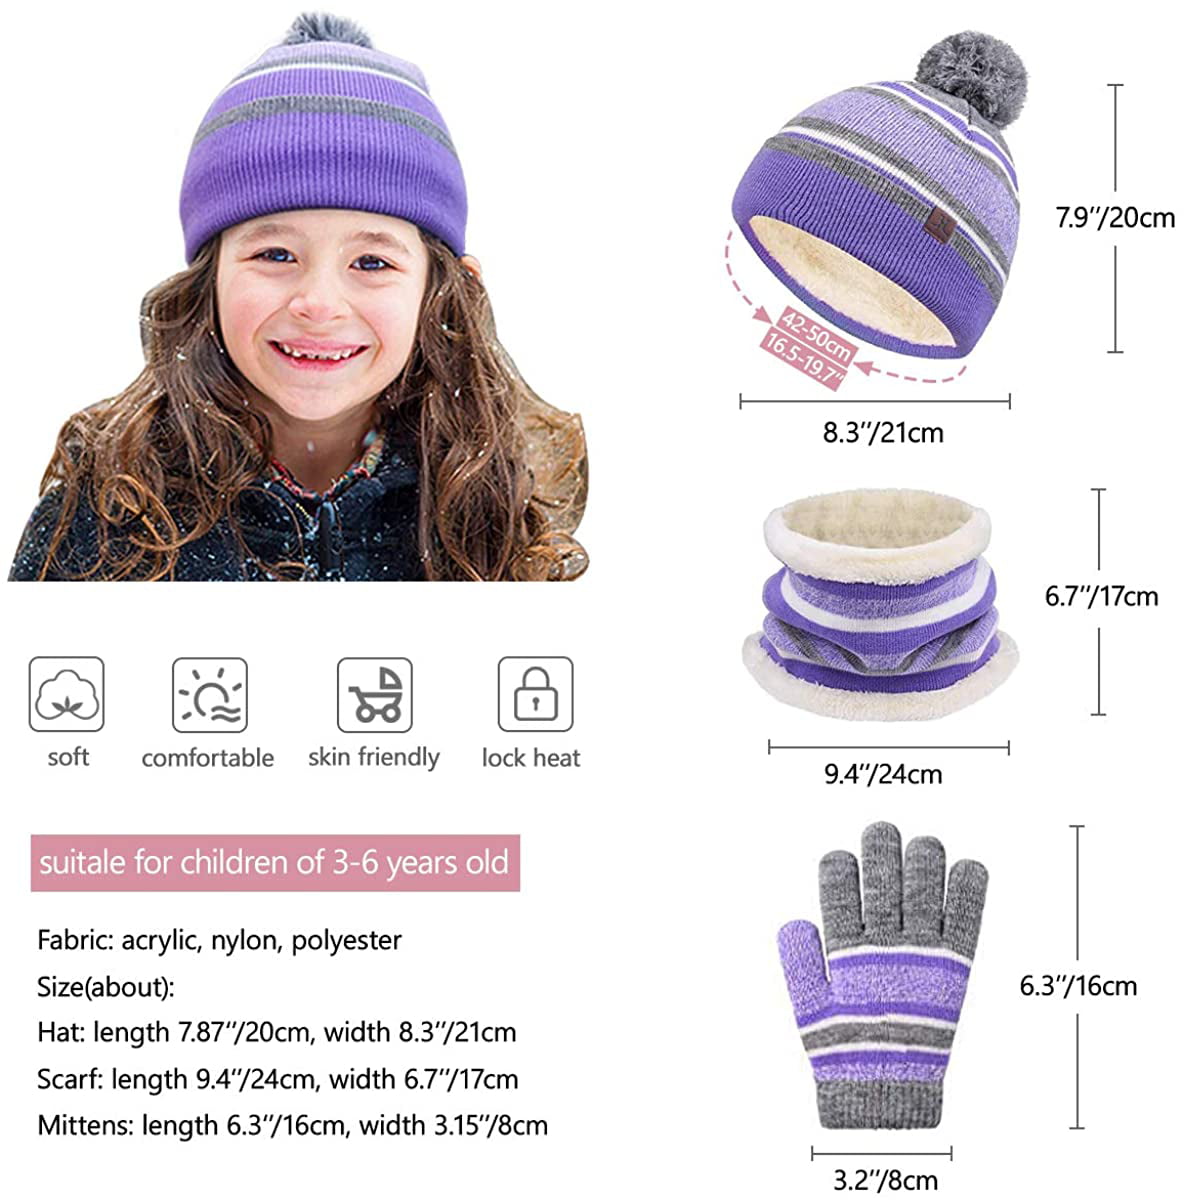 Children Striped Knitted Hat Gloves For Indoor Outdoor Activities  Comfortable Skin-friendly Warm Hat Gloves Set Navy Gray S